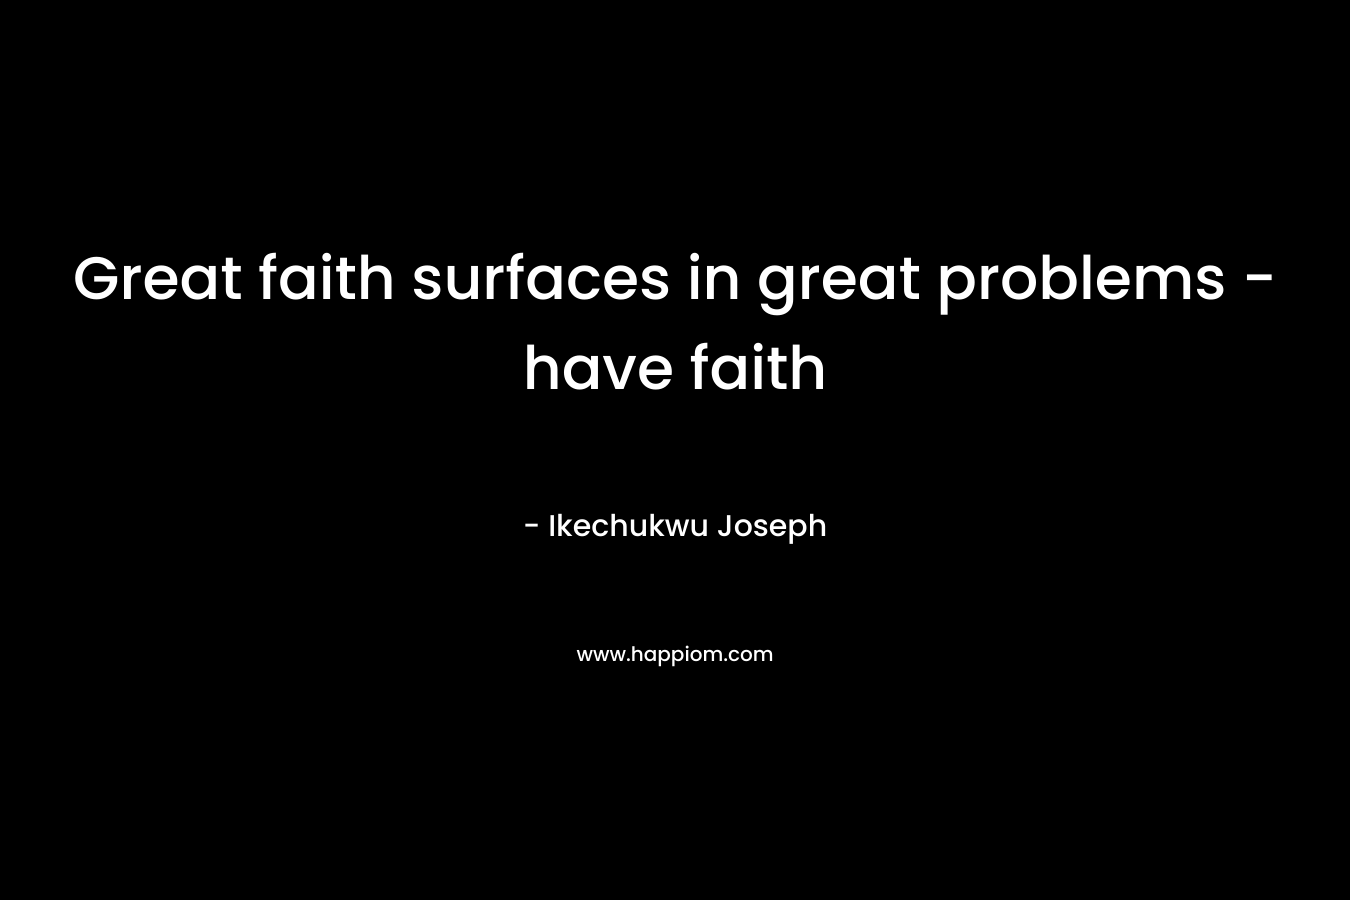 Great faith surfaces in great problems - have faith